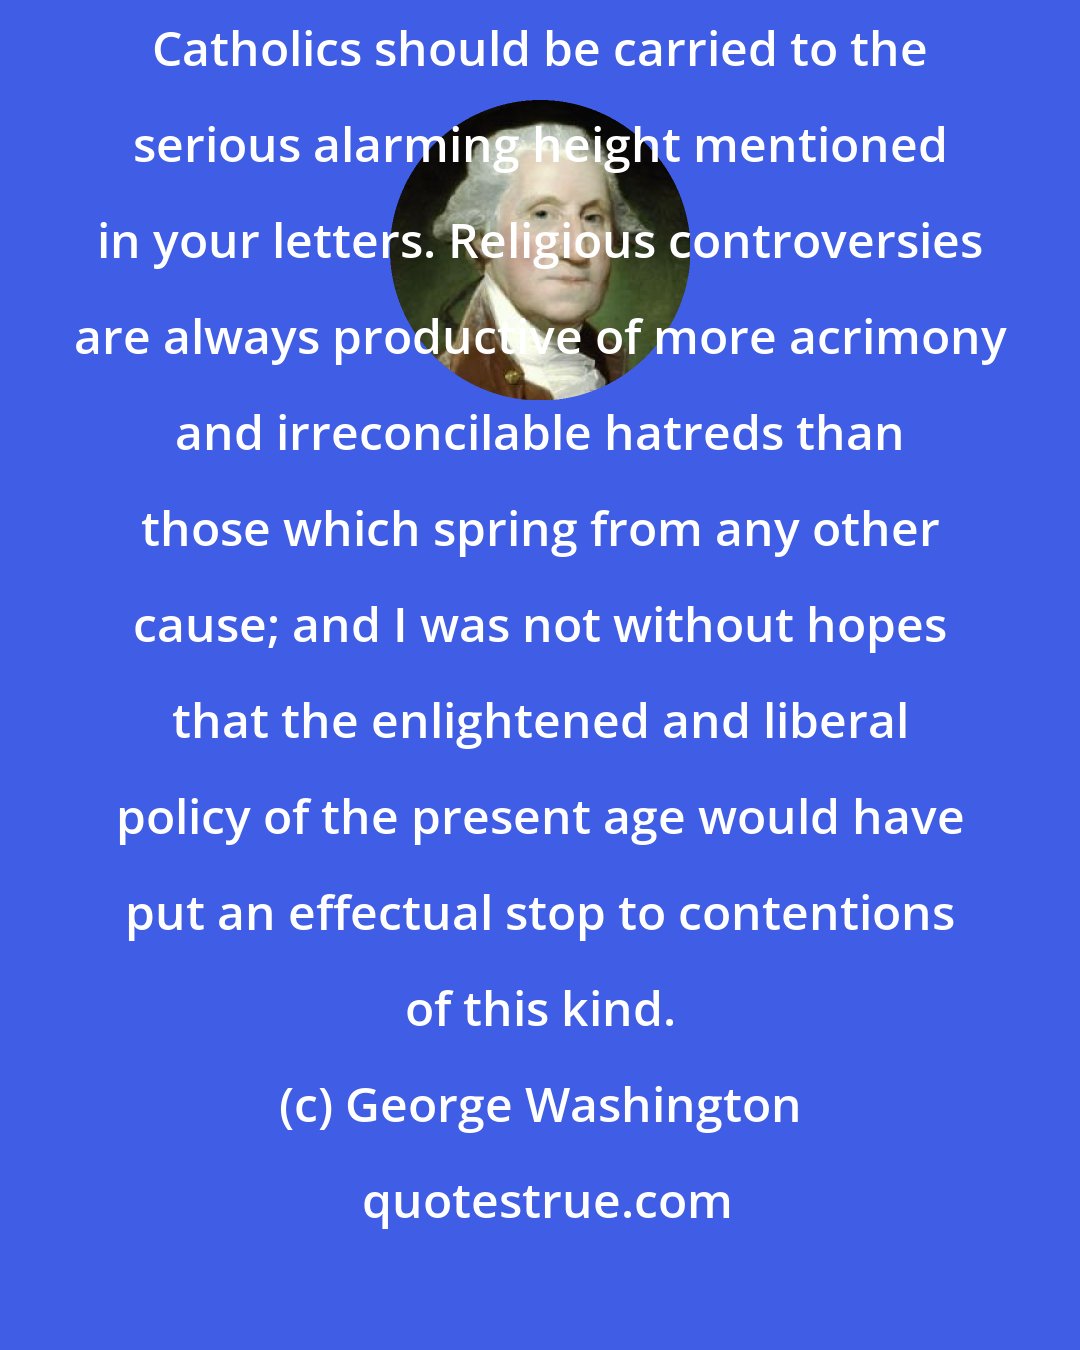 George Washington: I regret exceedingly that the disputes between the protestants and Roman Catholics should be carried to the serious alarming height mentioned in your letters. Religious controversies are always productive of more acrimony and irreconcilable hatreds than those which spring from any other cause; and I was not without hopes that the enlightened and liberal policy of the present age would have put an effectual stop to contentions of this kind.